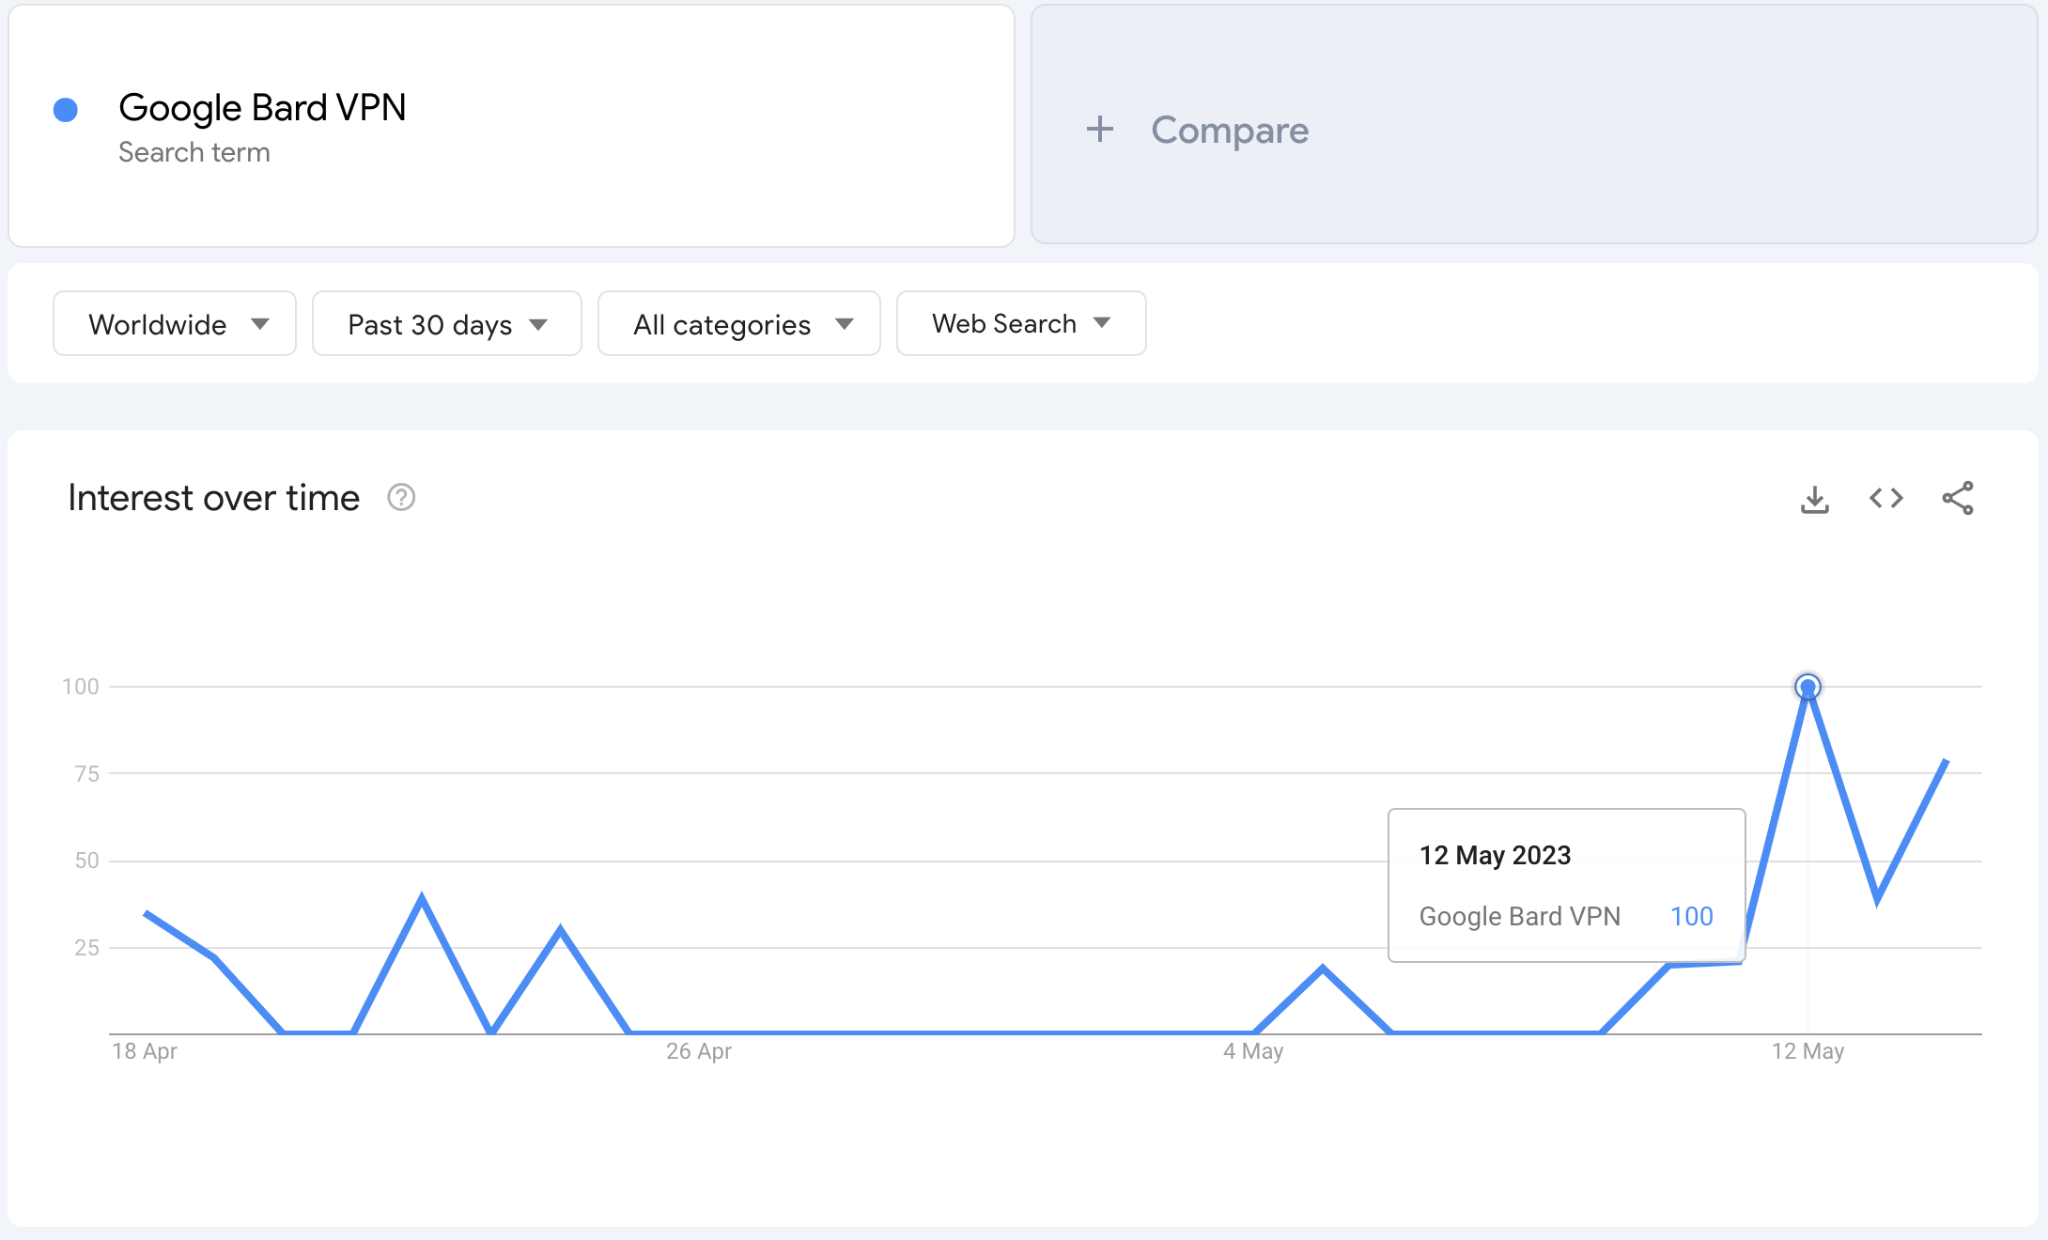 Google Trends graph showing the rise in interest for the search term 'Google Bard VPN' since its launch on May 10, 2023